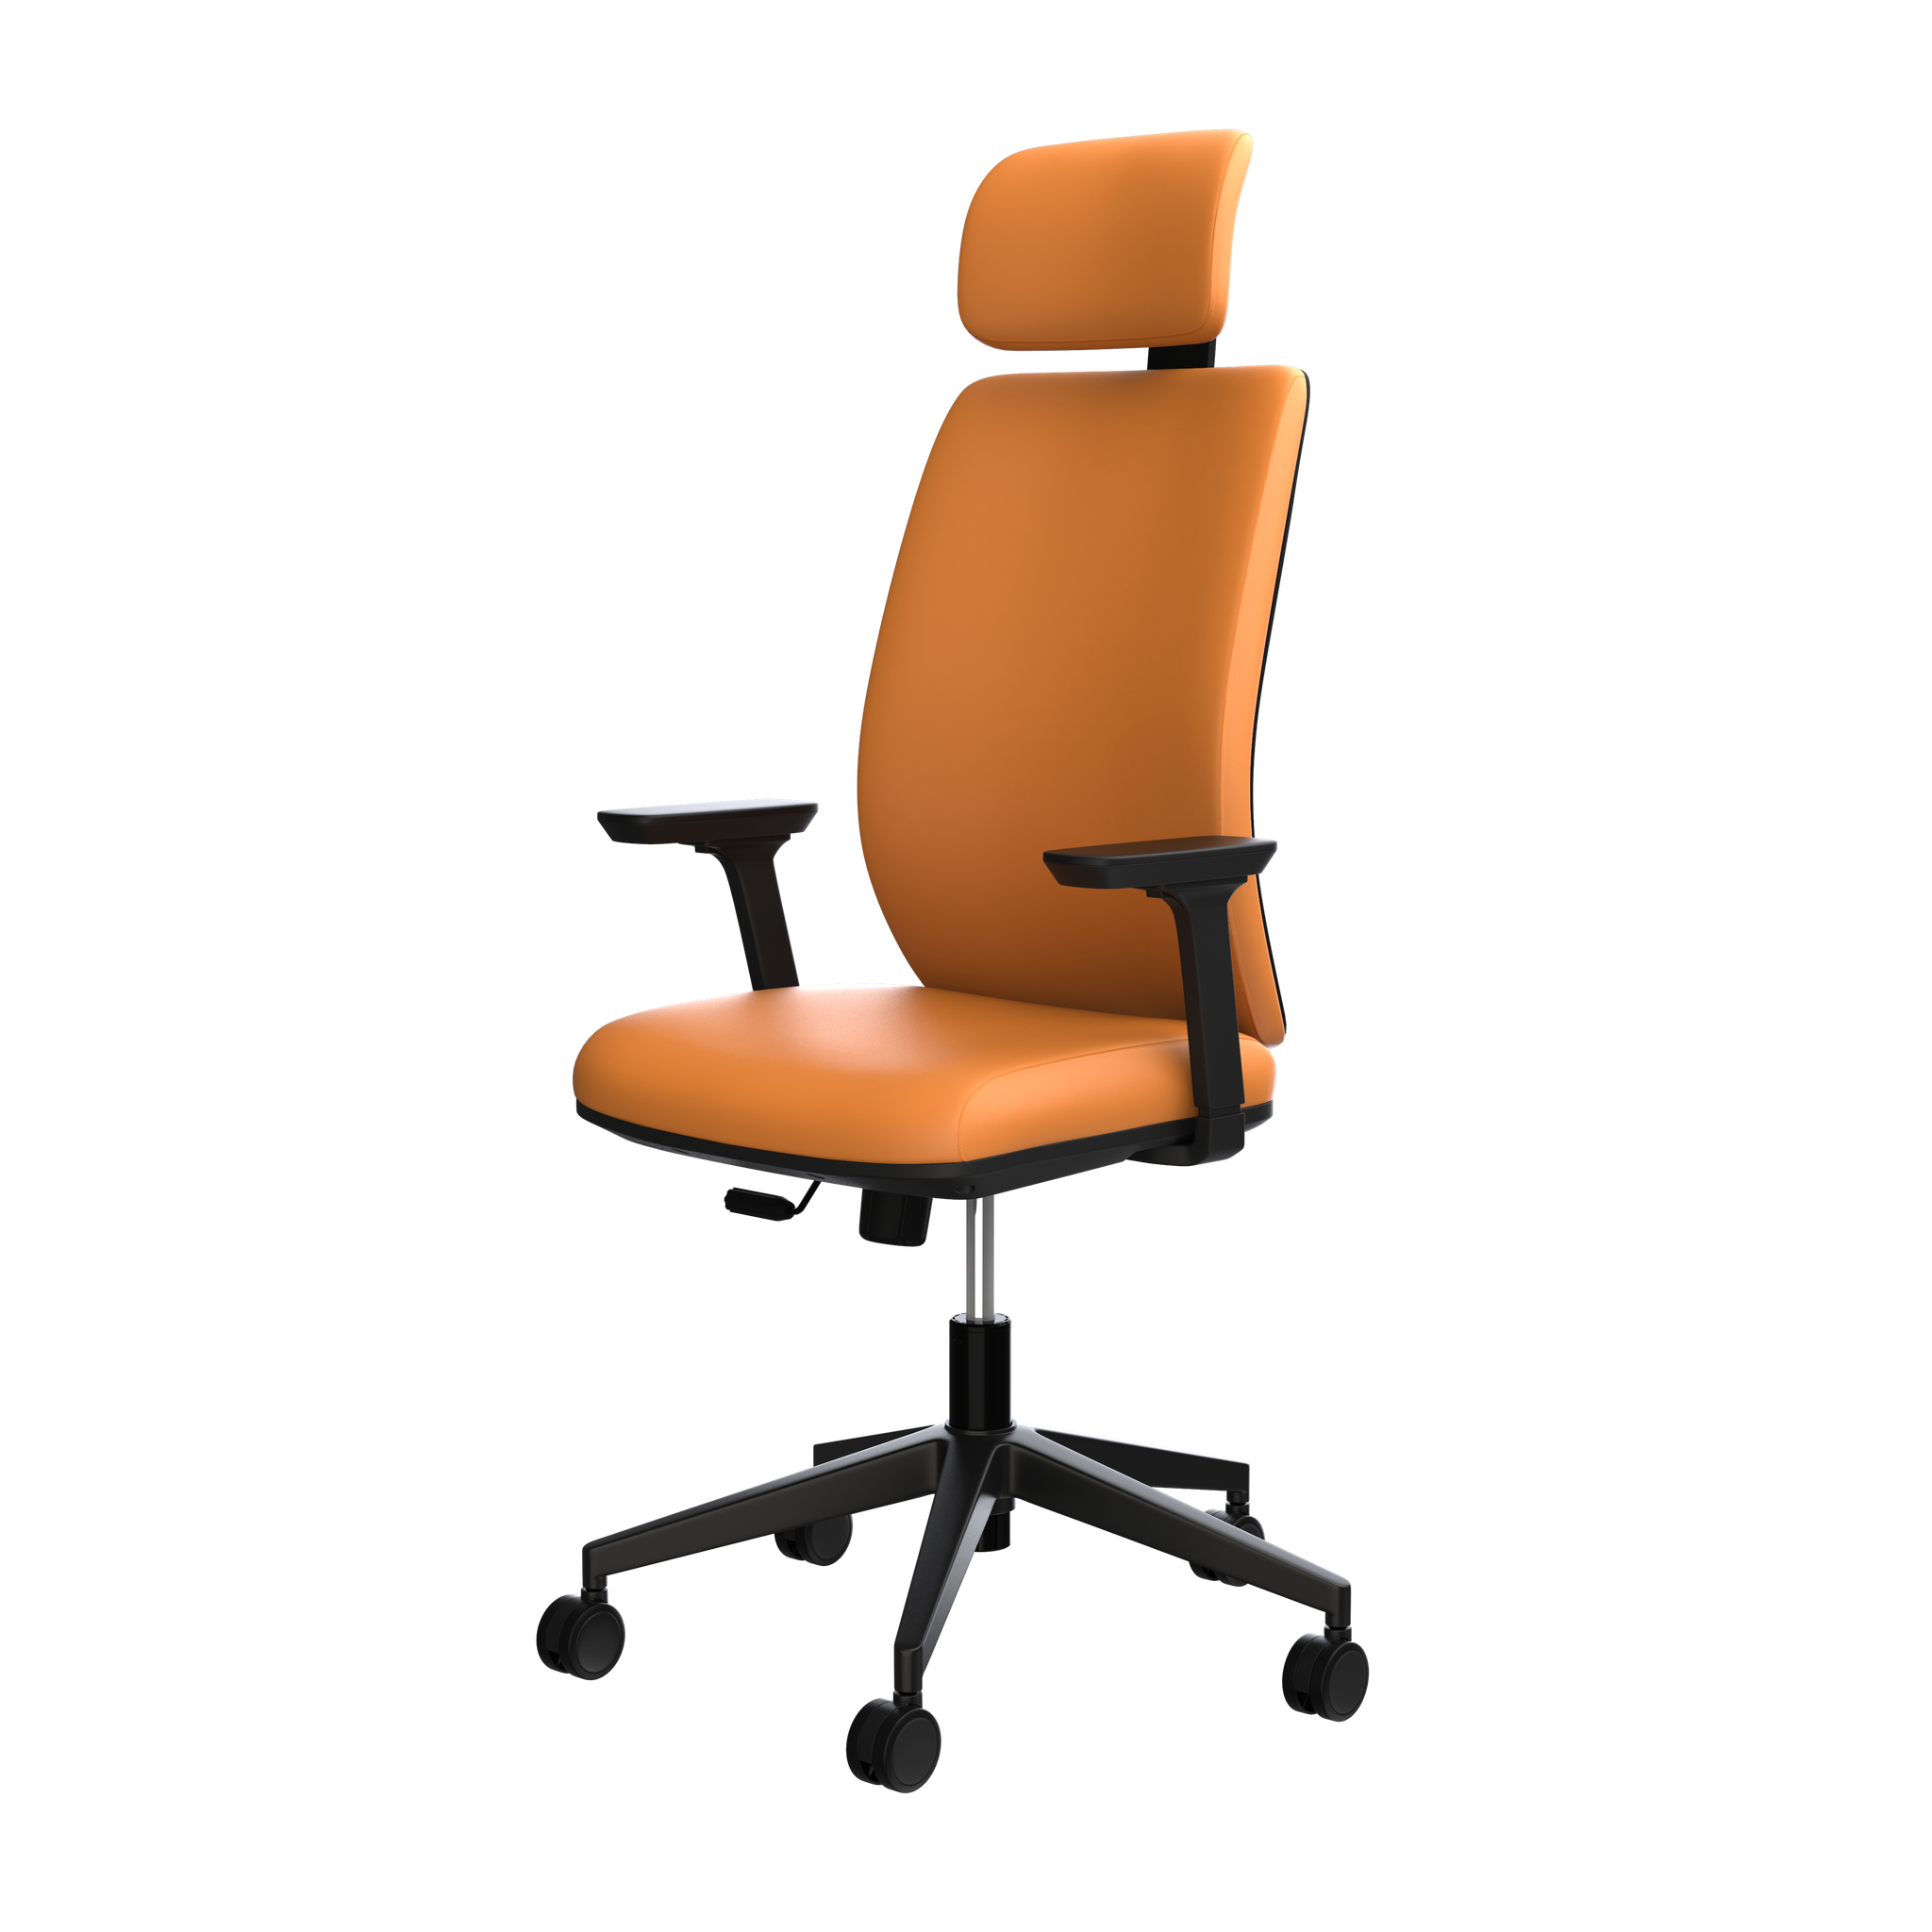 Are mesh office chairs really comfortable? - Quora